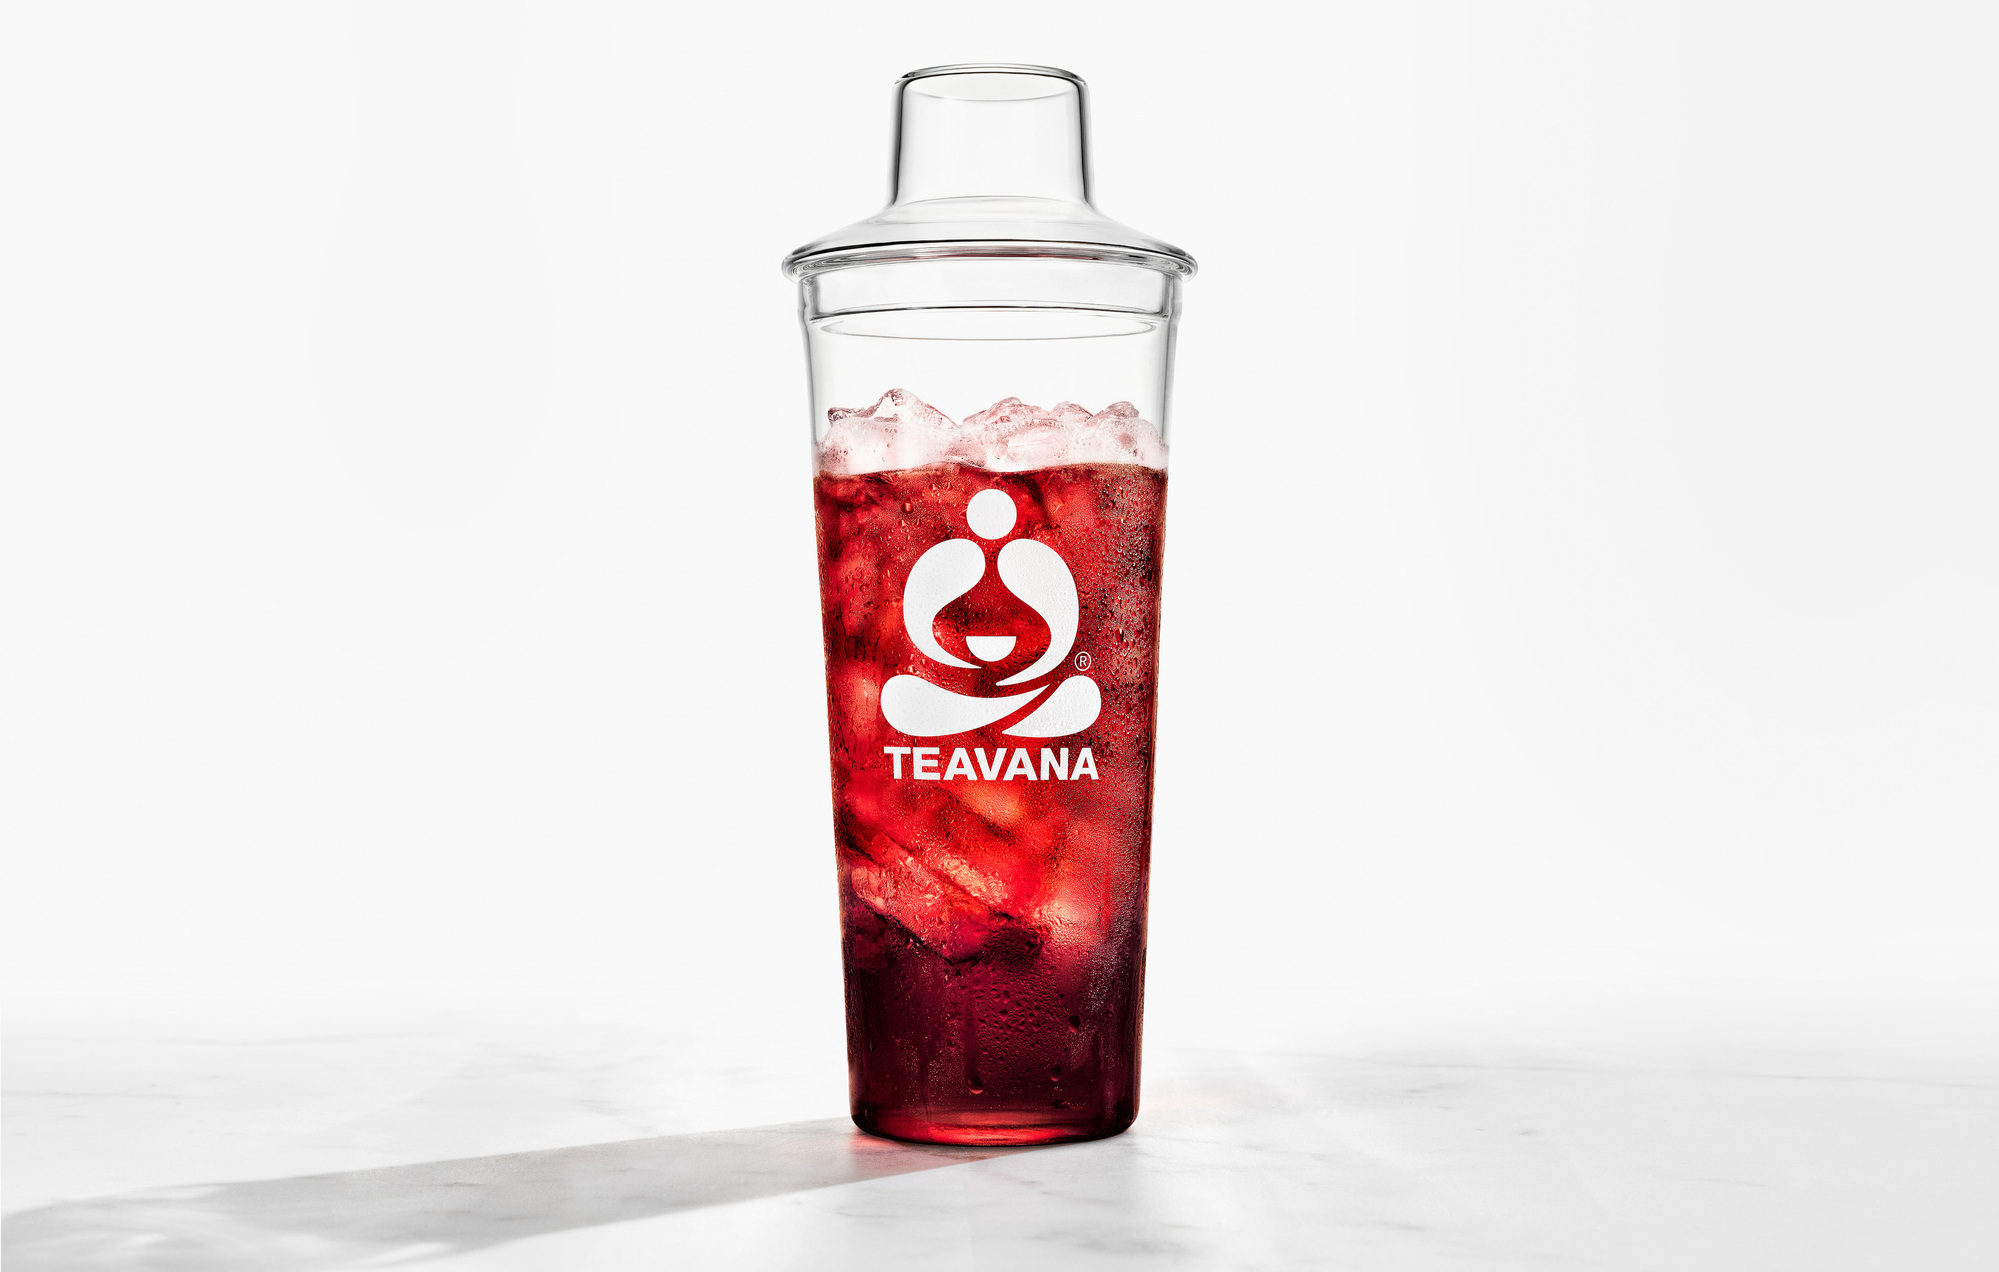 Teavana product advertising photography by beverage and drinks photographer Timothy Hogan in Los Angeles